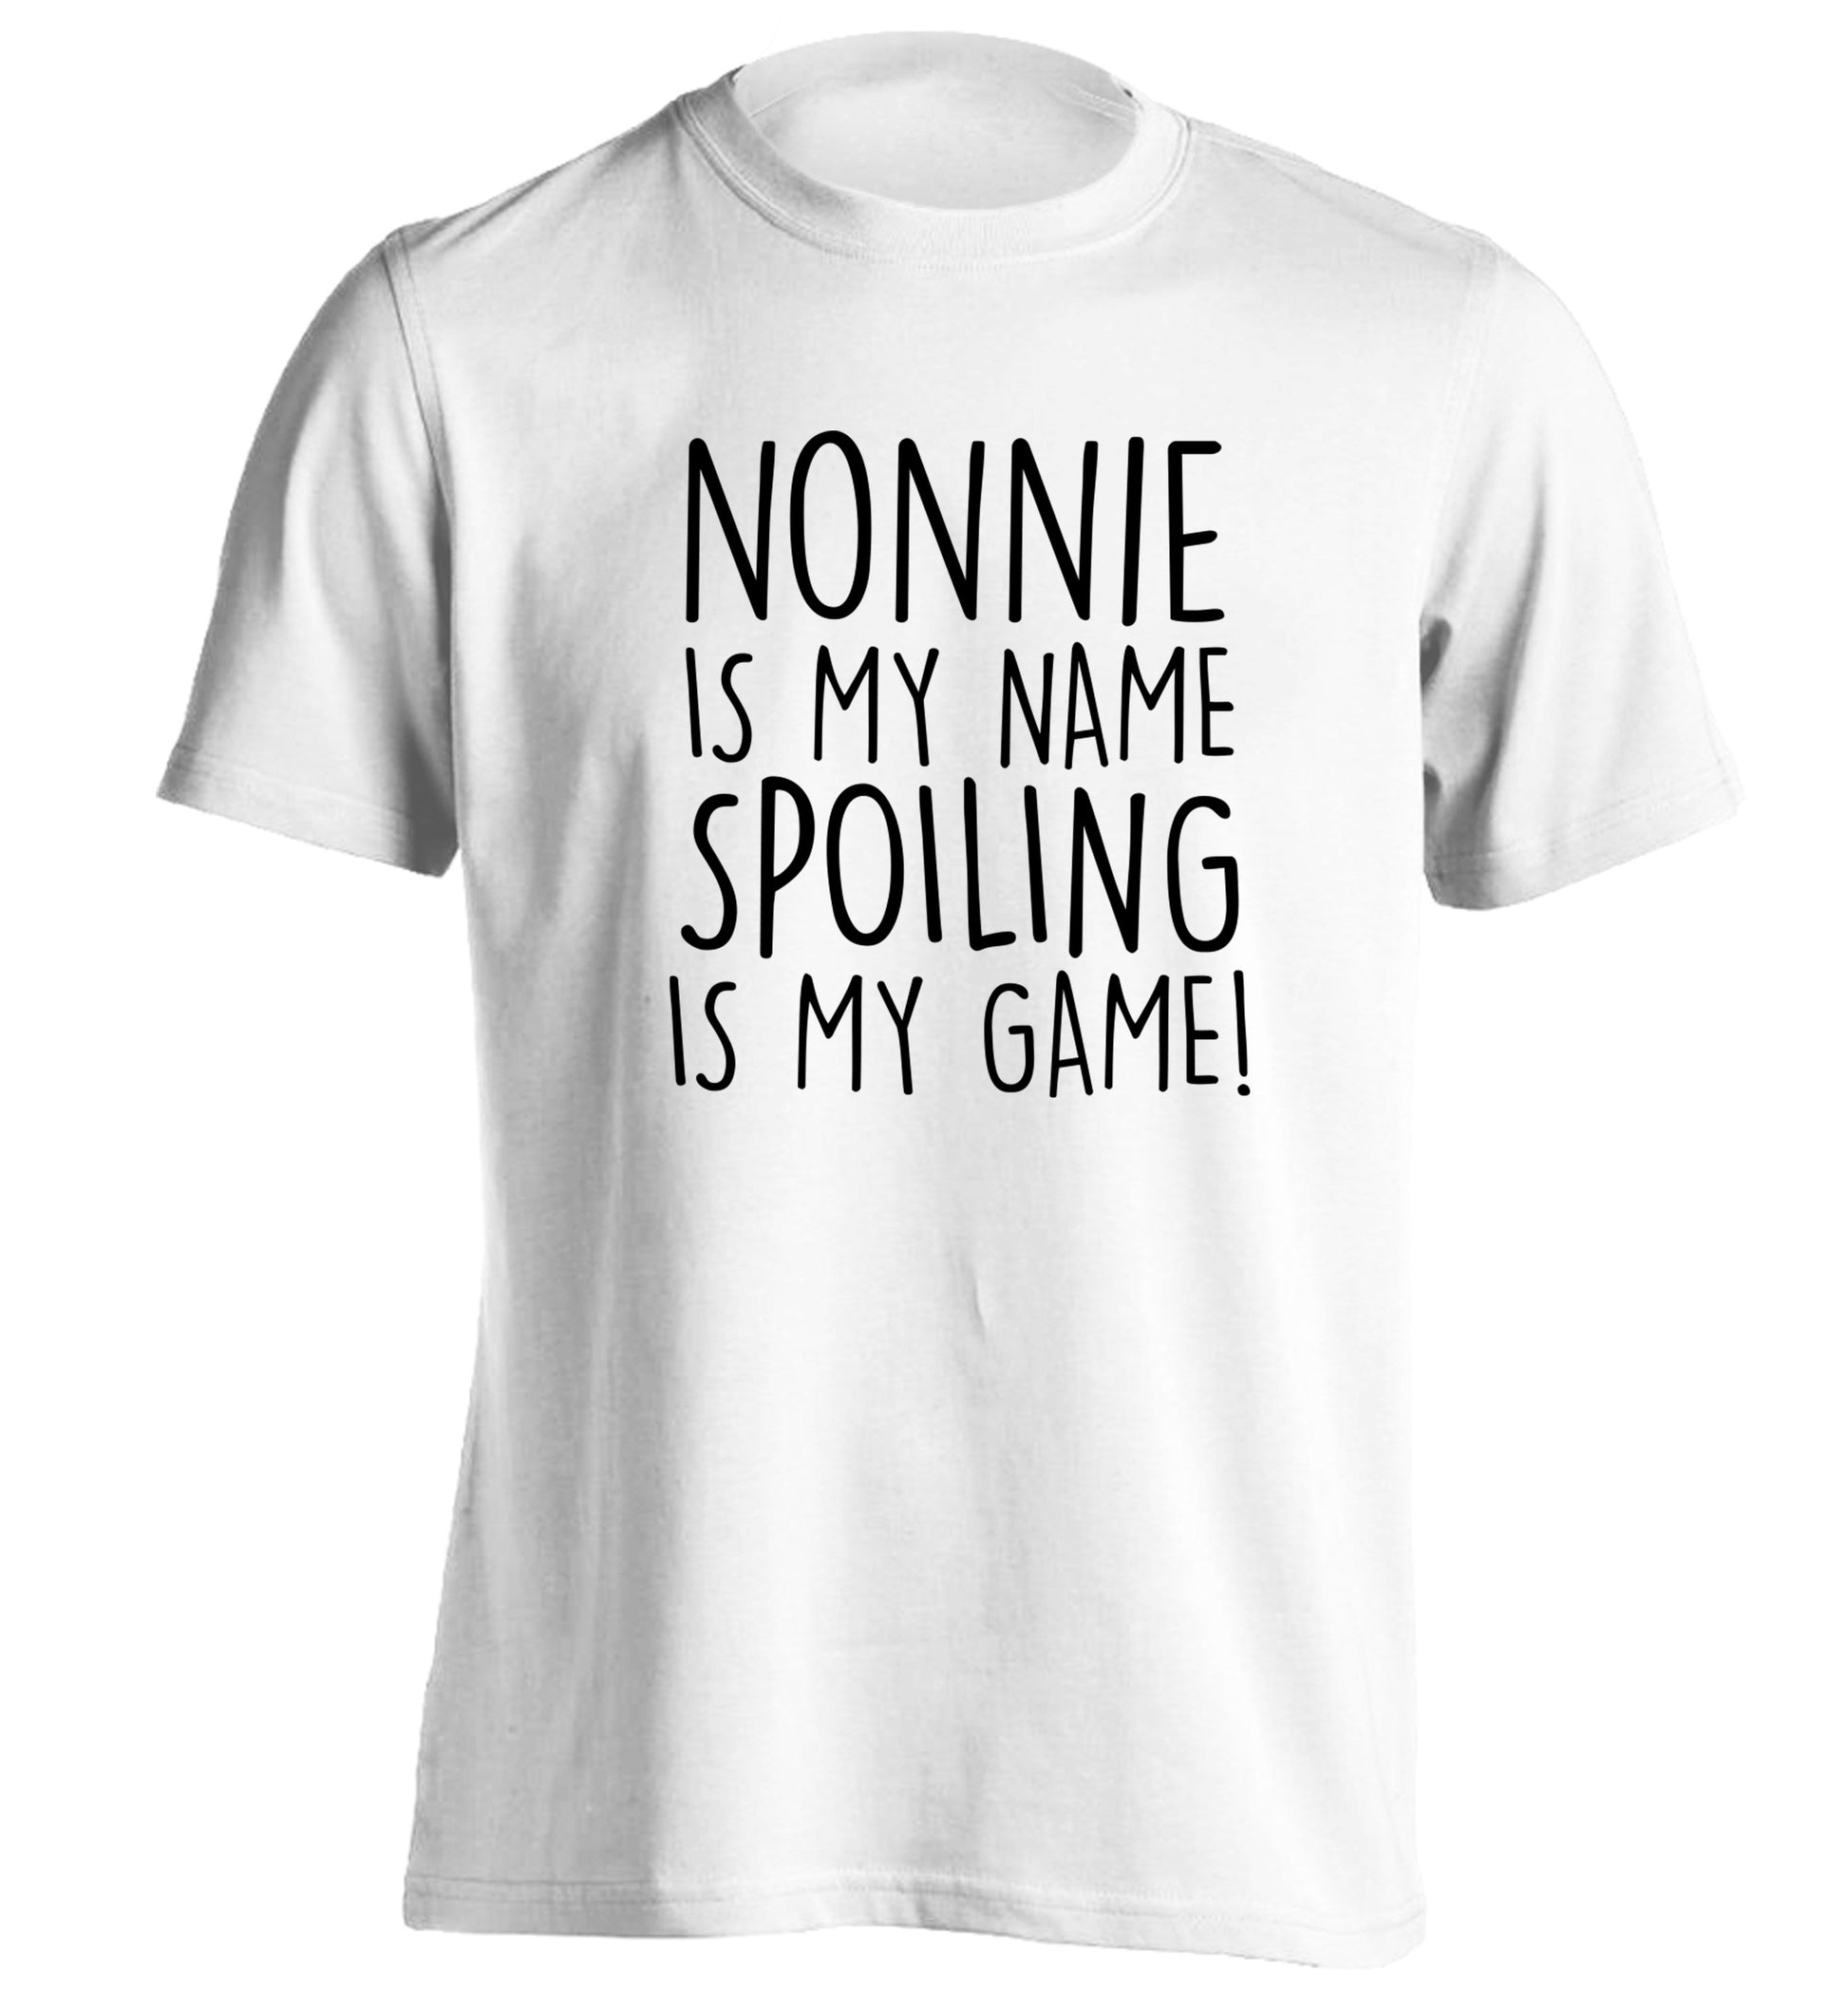 Nonnie is my name, spoiling is my game adults unisex white Tshirt 2XL